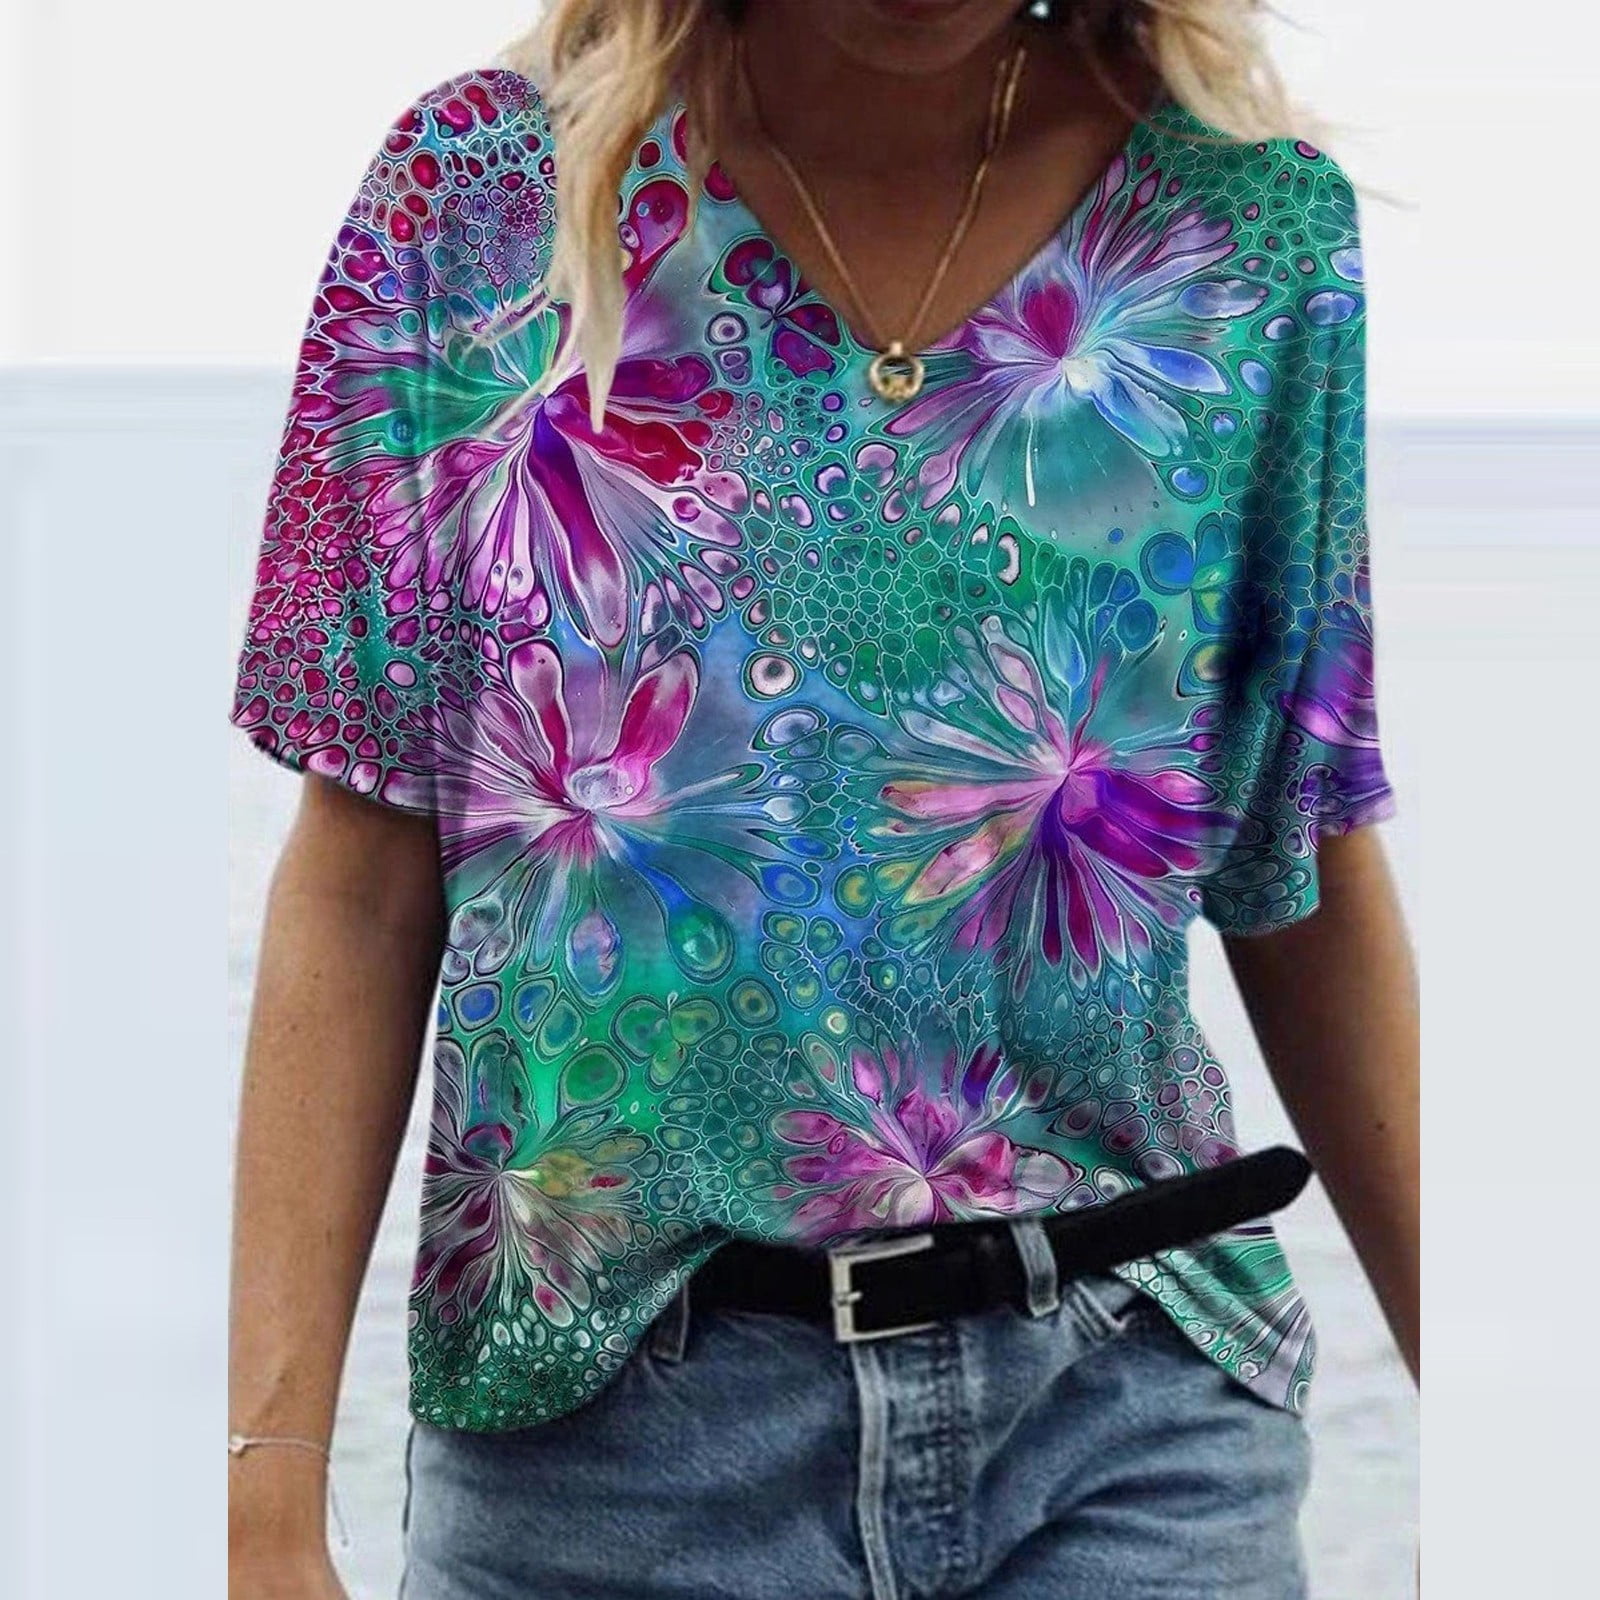 Womens Summer Tops,Womens Tie Dye Short Sleeve Shirts for Womens V Neck Graphic Printed Tee Casual Summer Tops 